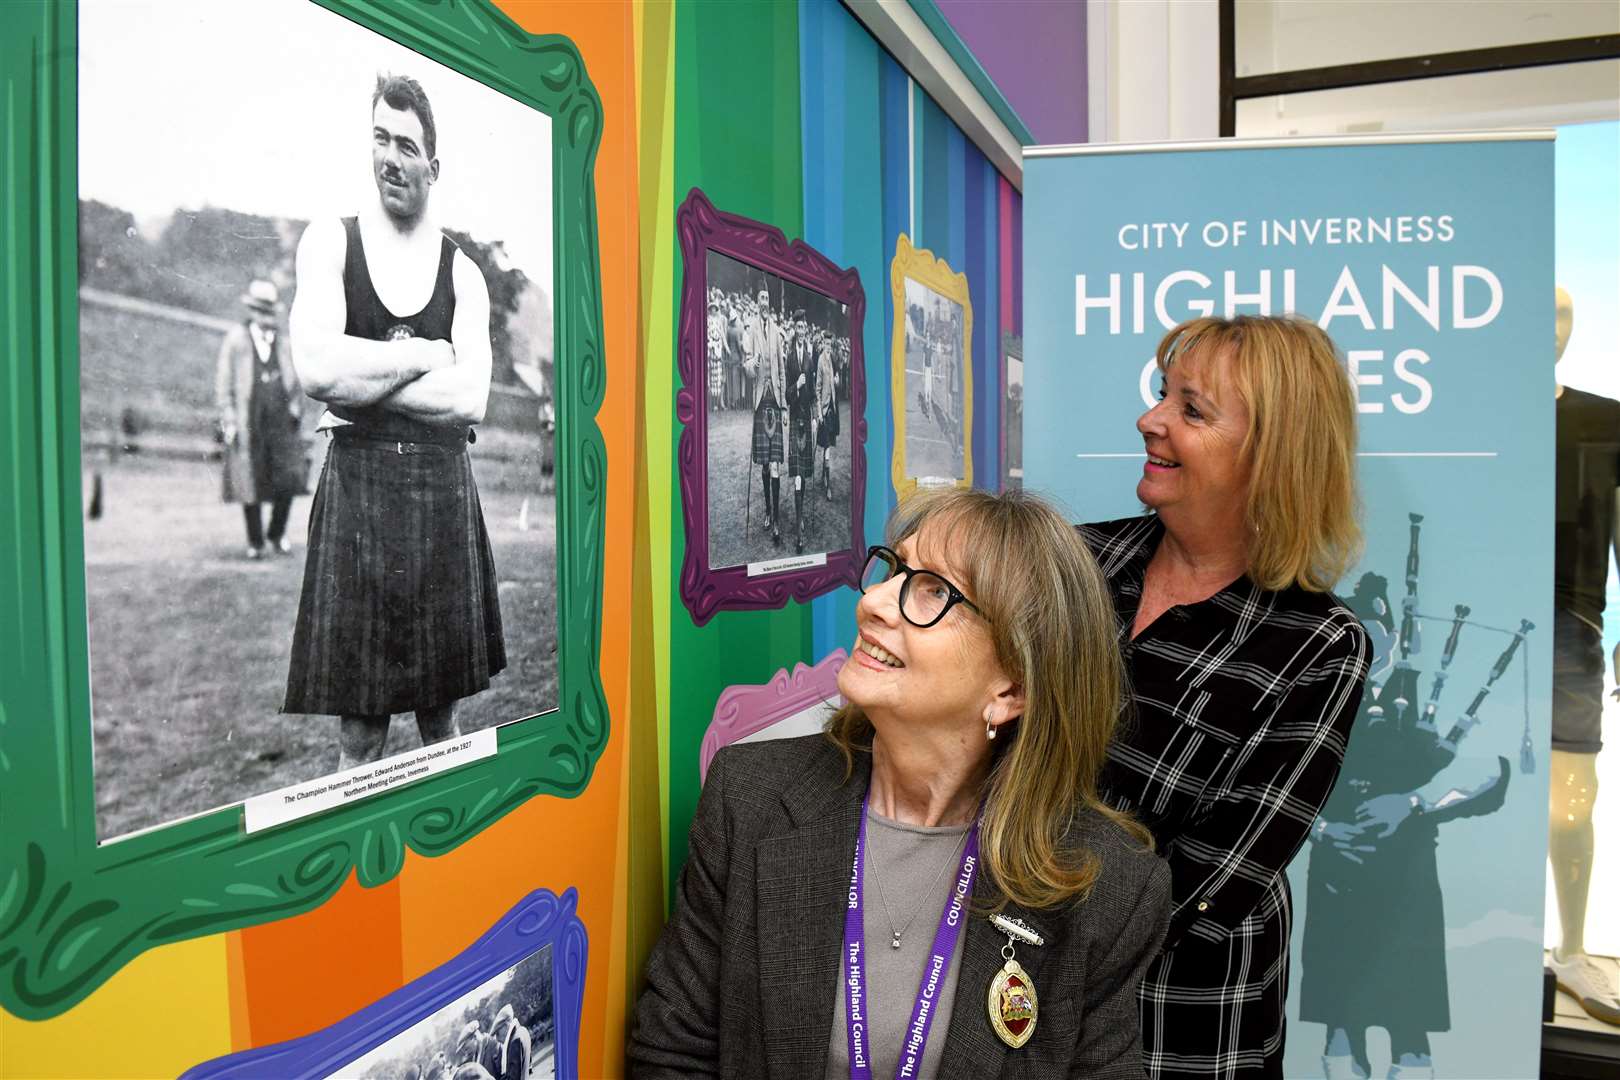 Inverness Provost Glynis Campbell-Sinclair and Jackie Cuddy, Eastgate Shopping Centre manager, take at look at the images.